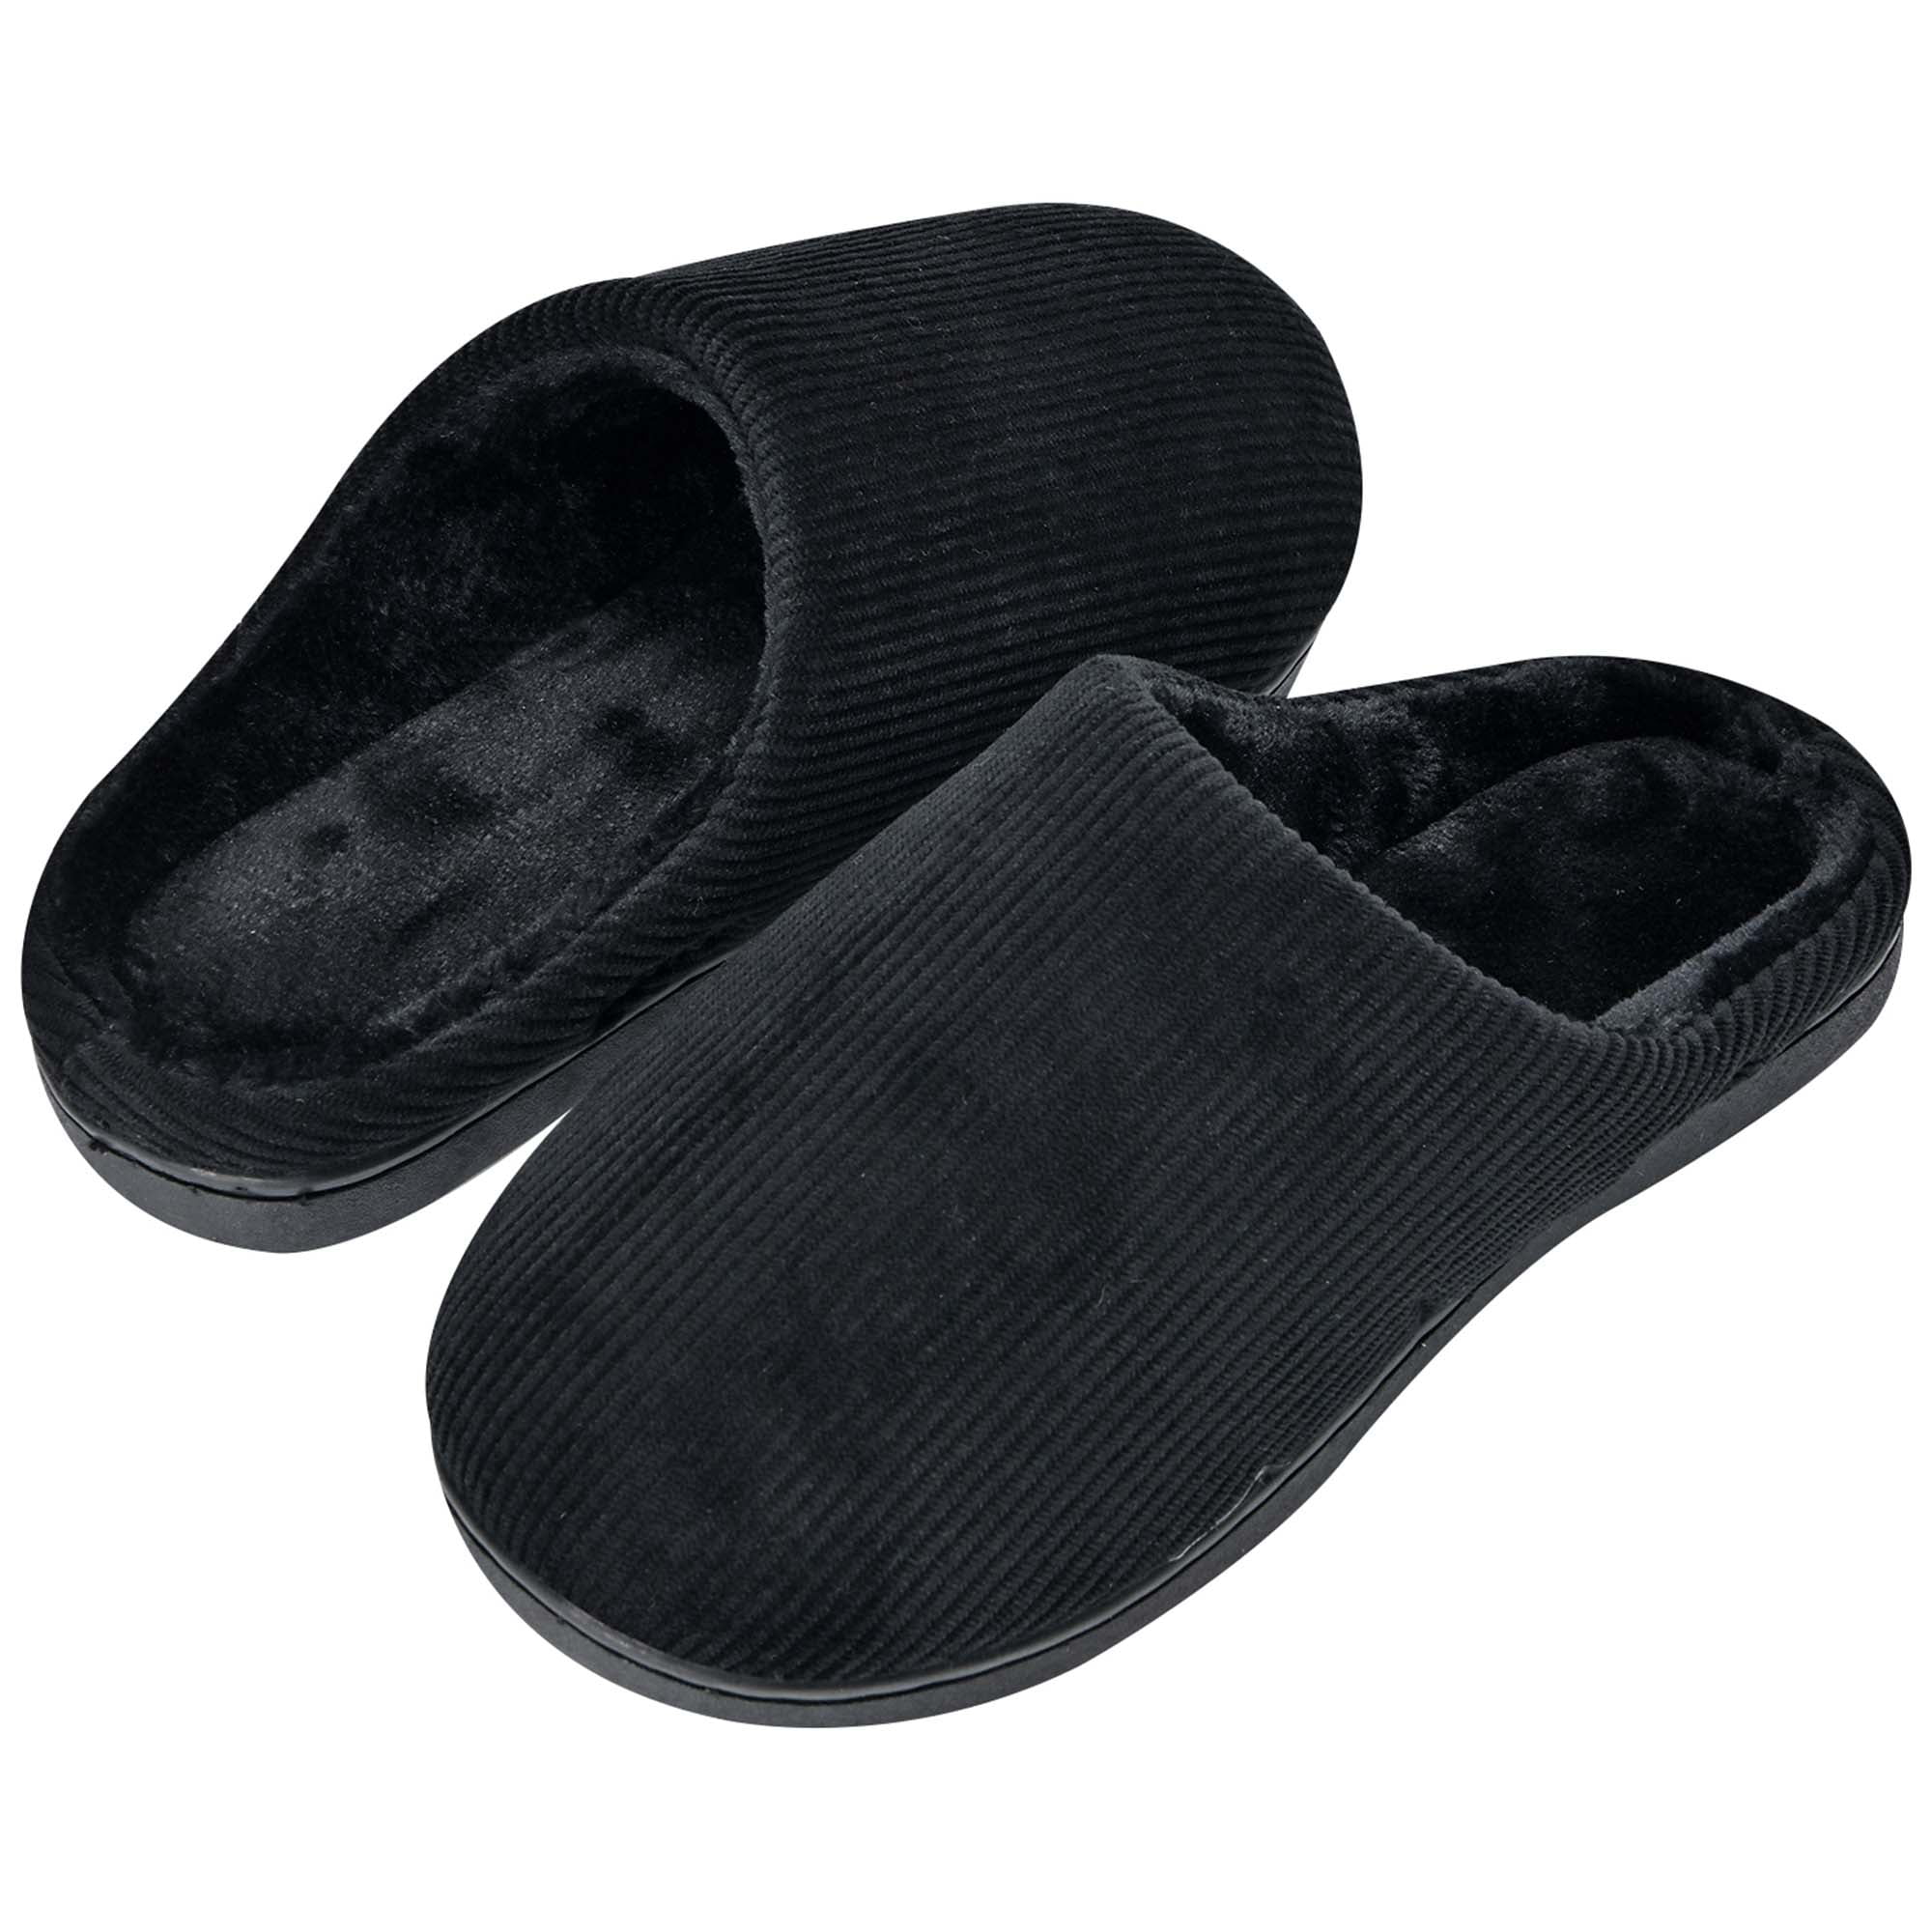 Men's Bedroom Slippers Faux Lined Non Skid House Shoes Warm -